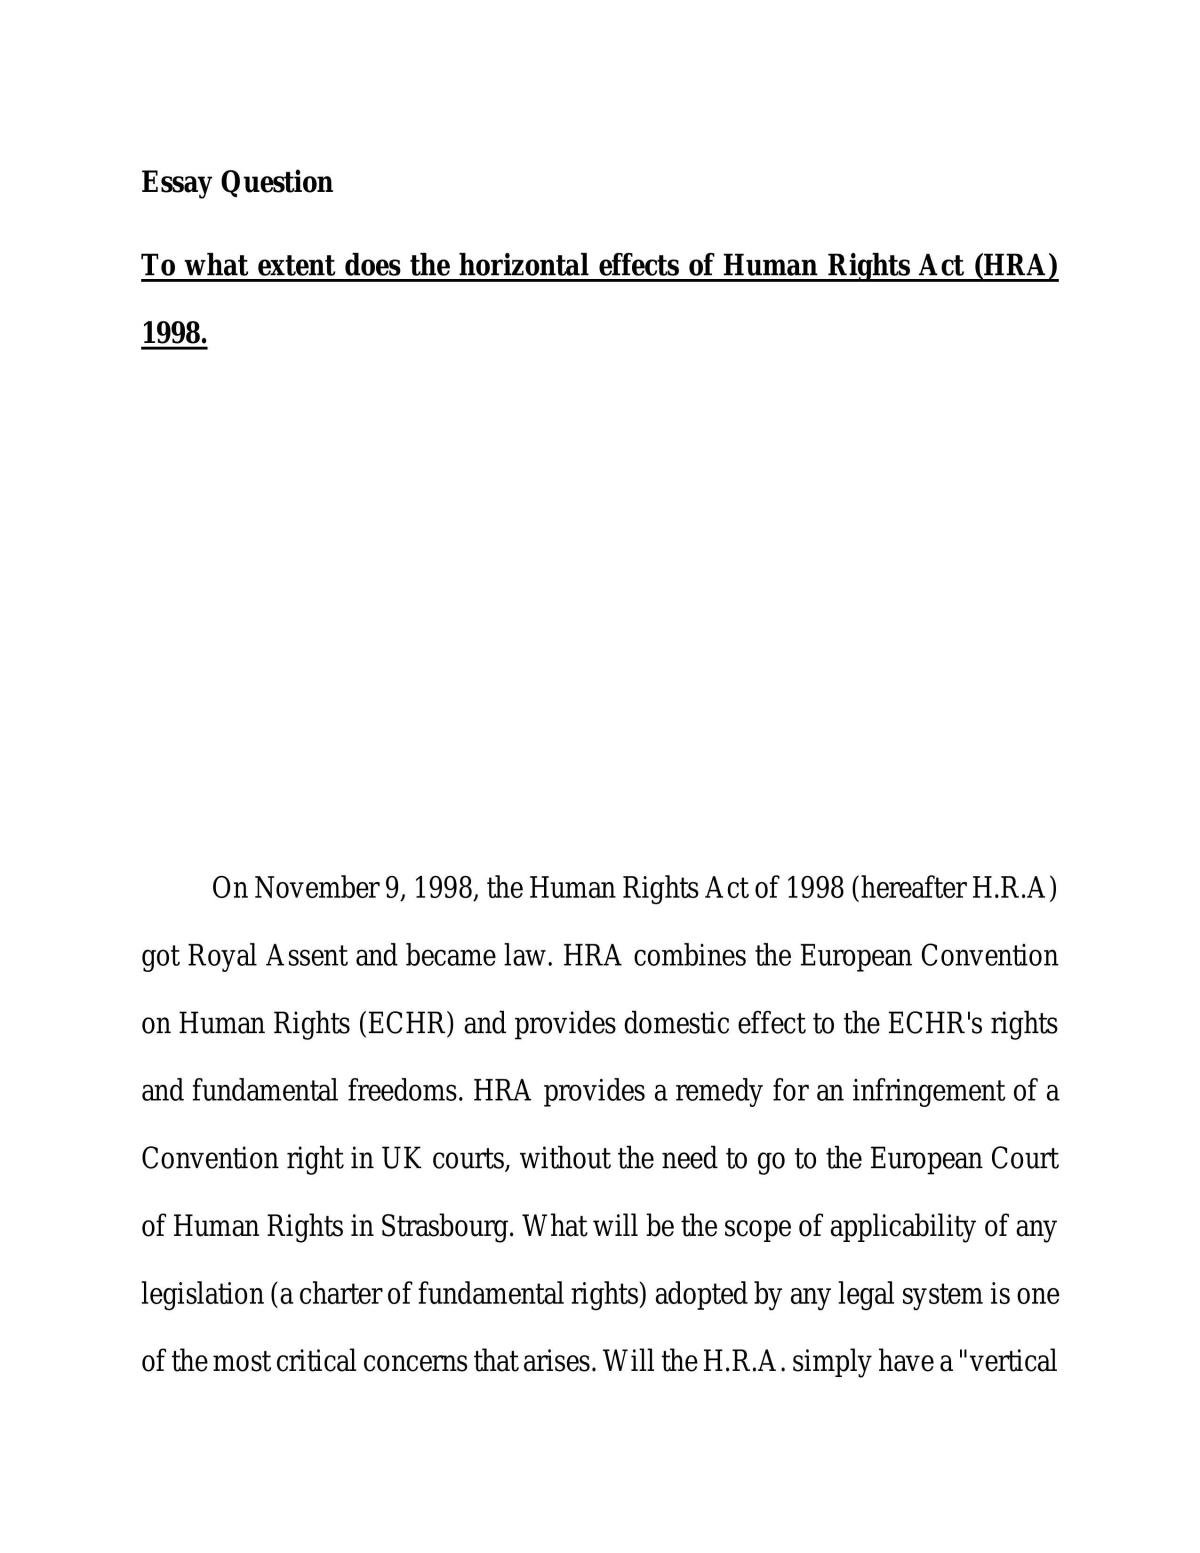 Horizontal  effects of human rights act 1998 - Page 1